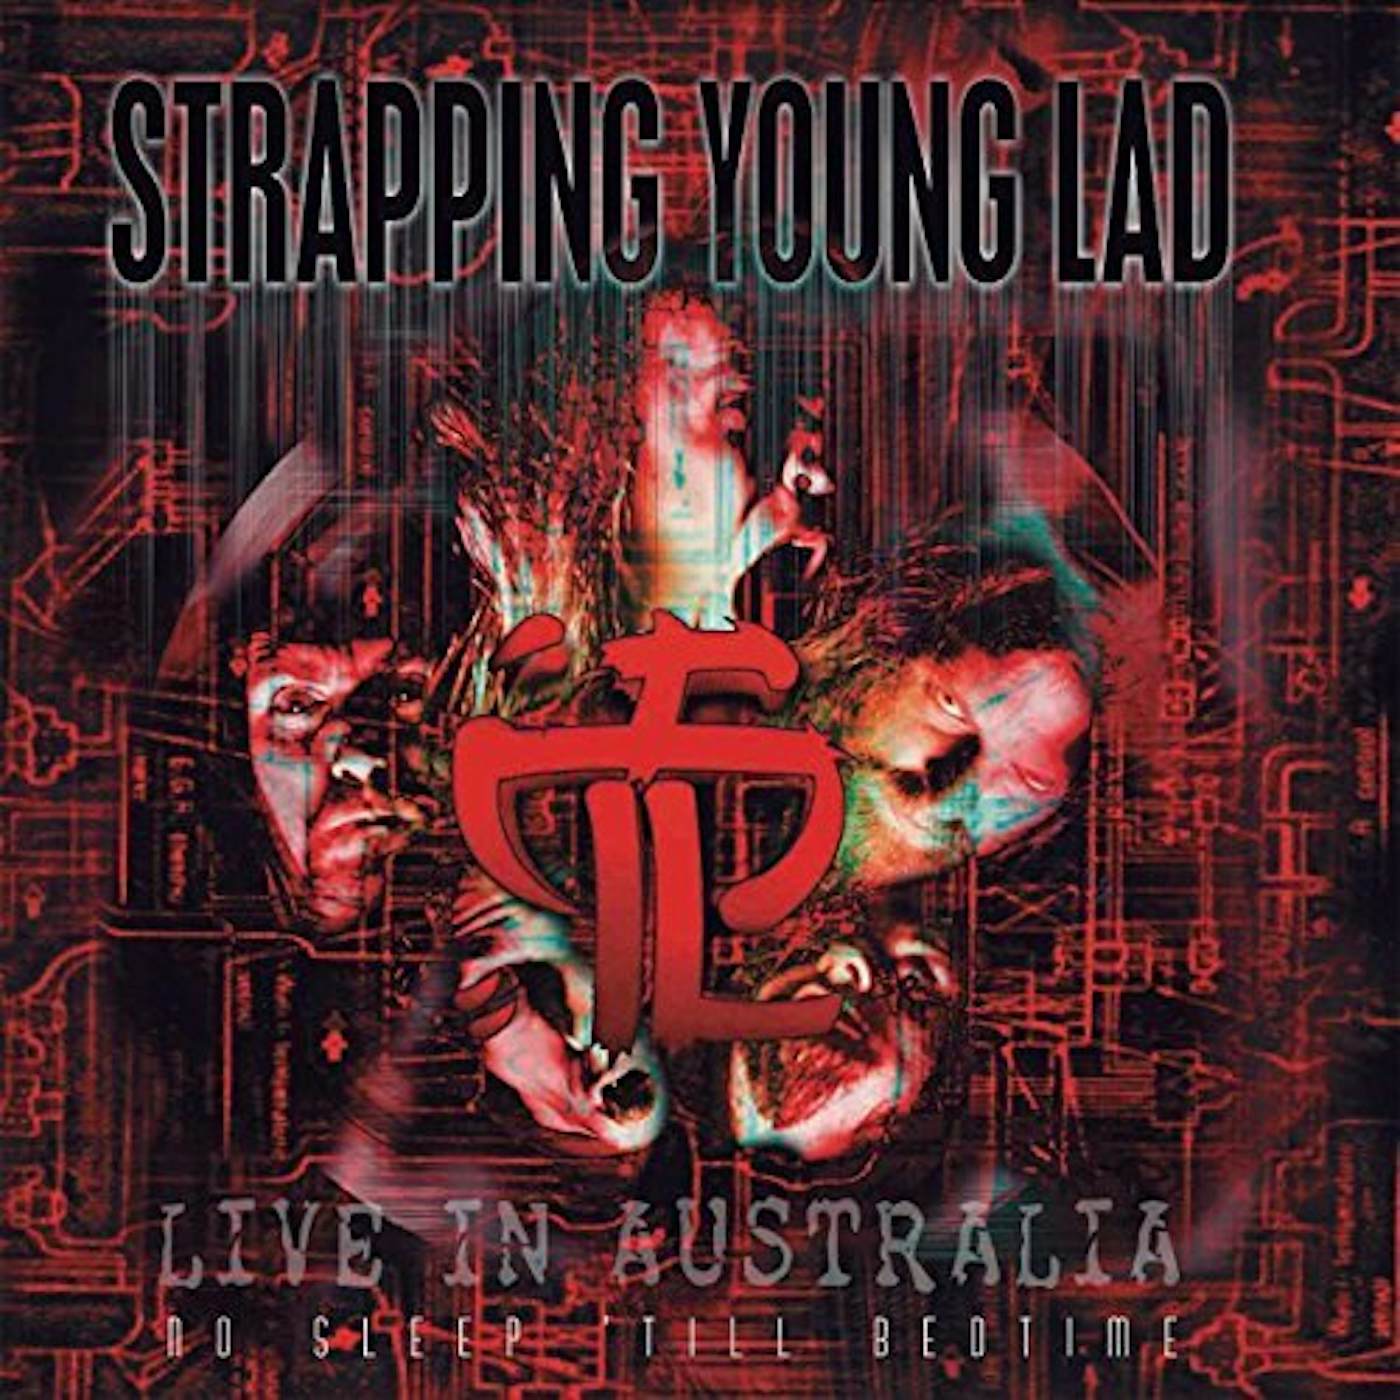 Strapping Young Lad NO SLEEP 'TIL BEDTIME - LIVE IN AUSTRALIA Vinyl Record